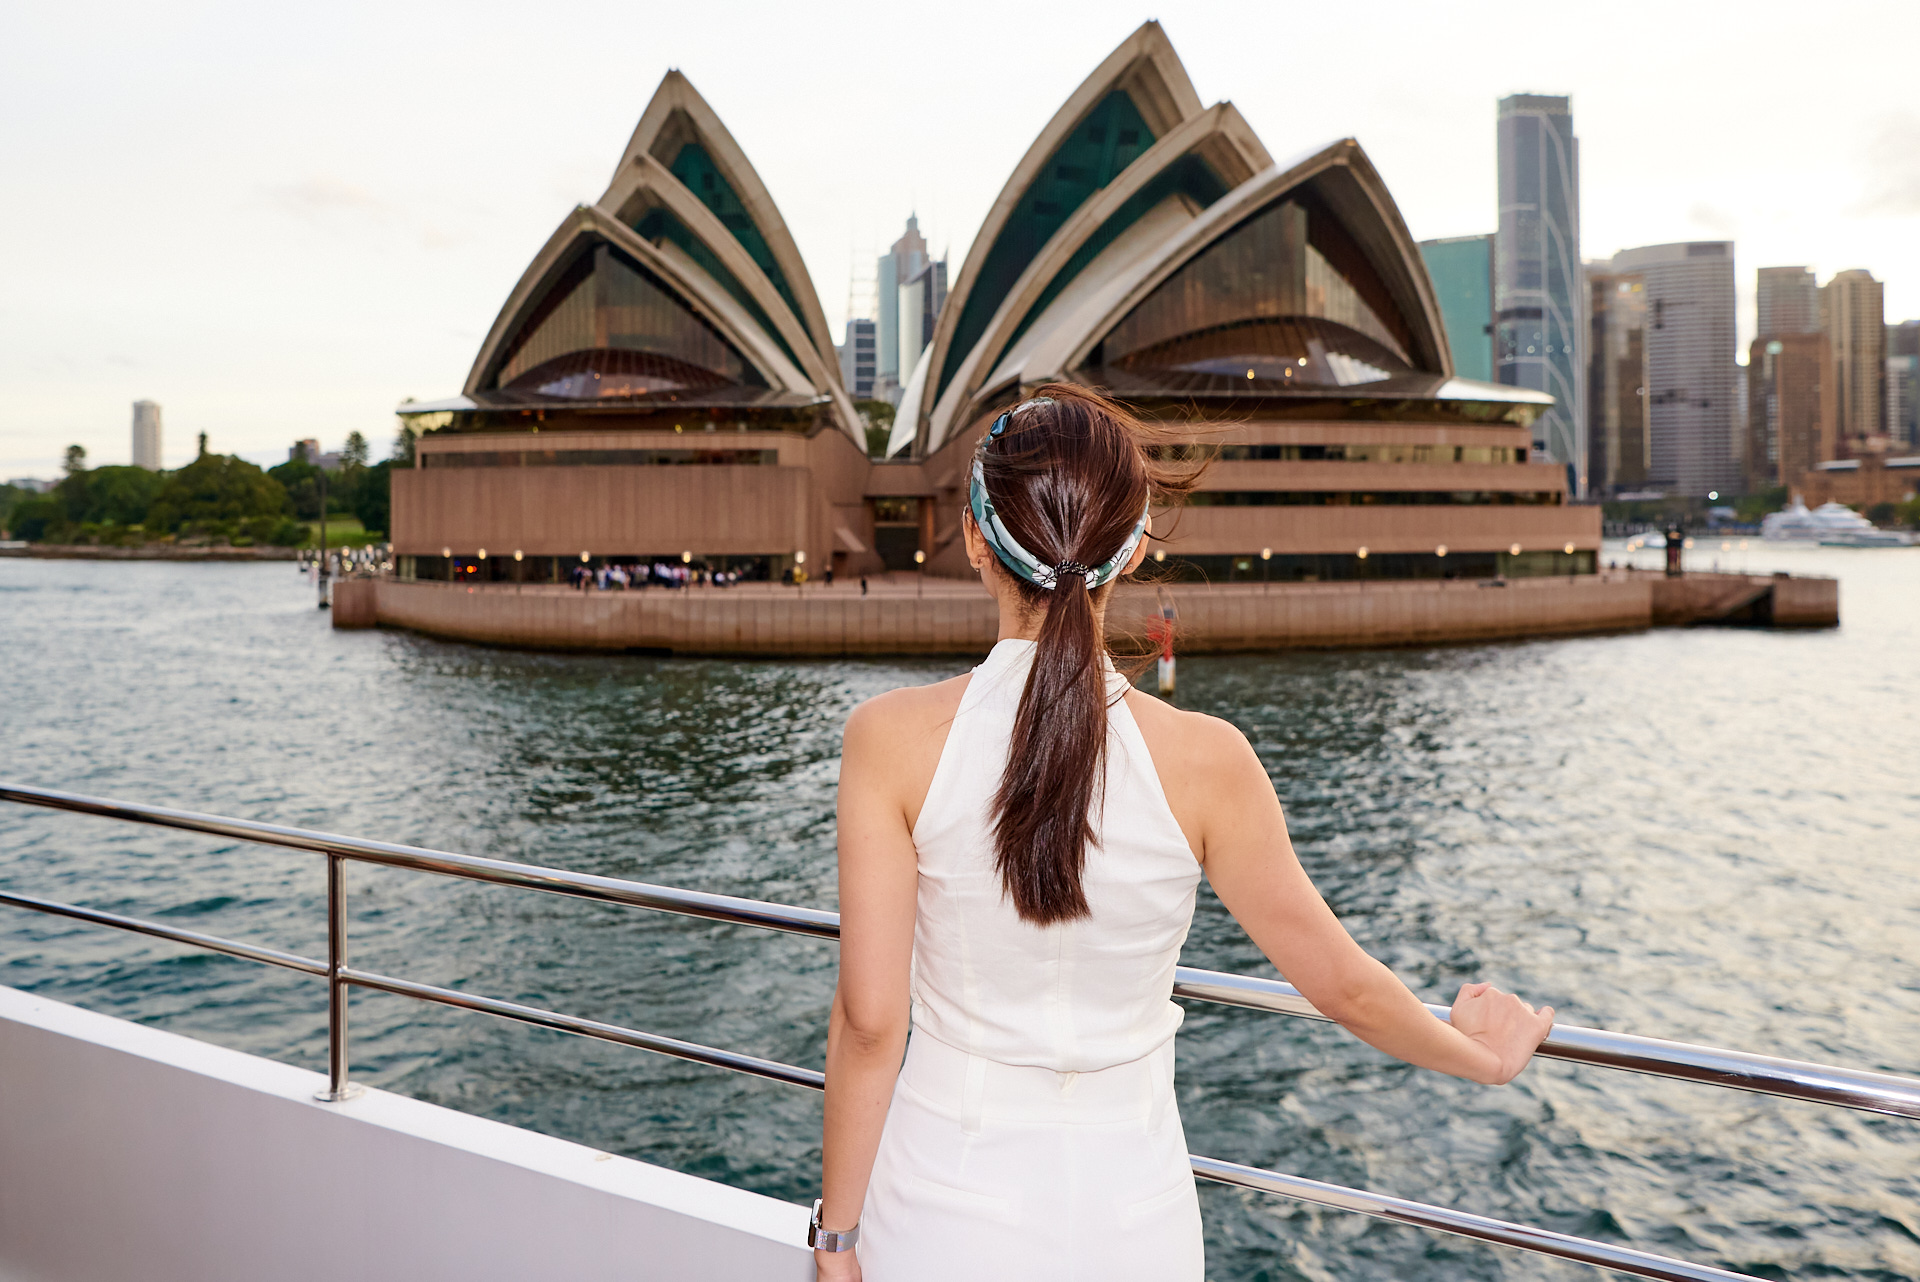 On Board The Jackson Super Yacht with Sydney Opera House in Background. Sydney Harbour. Corporate Event Photography by orlandosydney.com OS1_6282.jpg